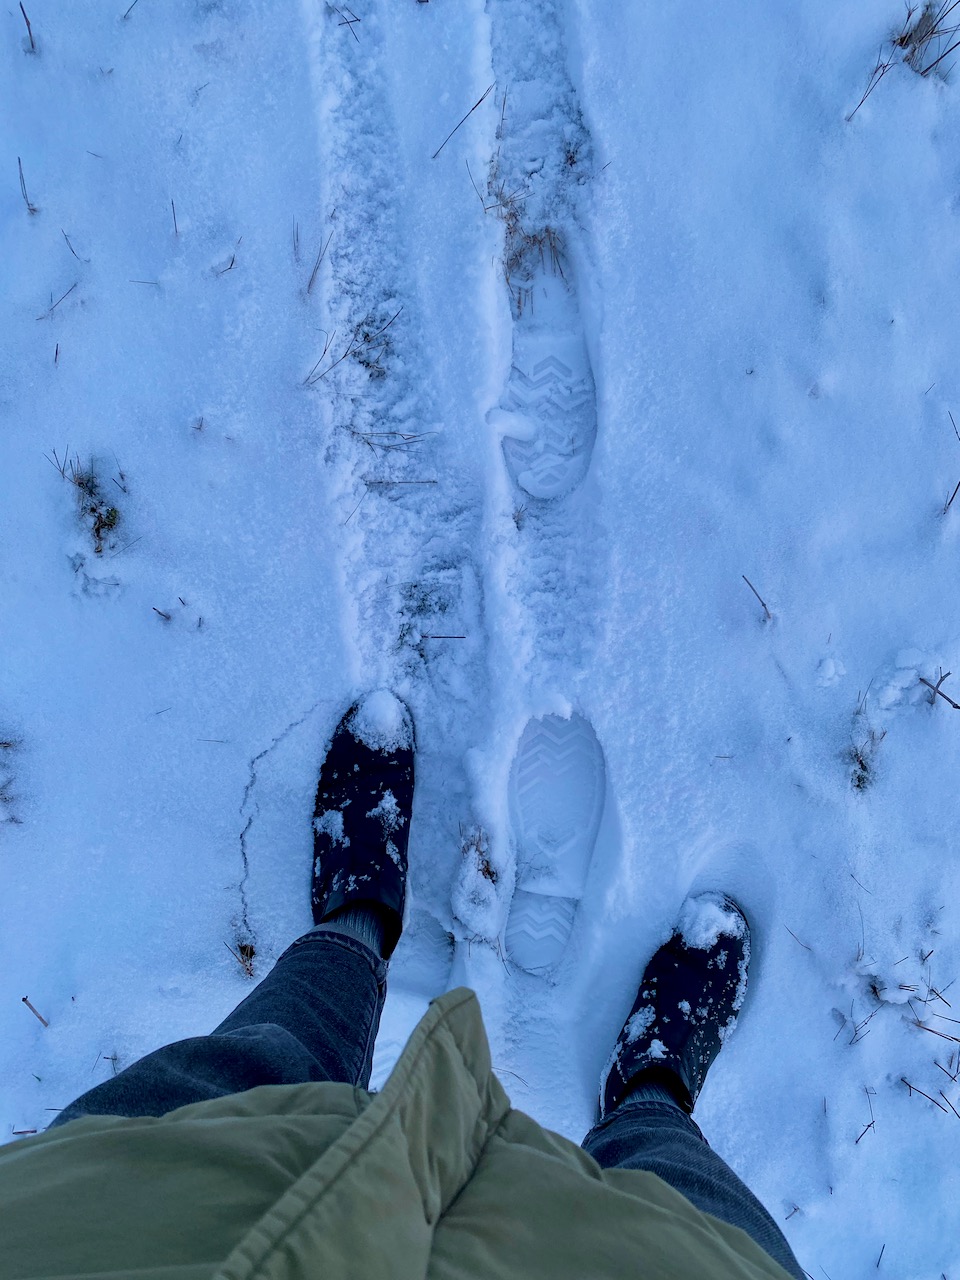 My zigzag boot sole tracks in the snow, the moment I realized they were mine.